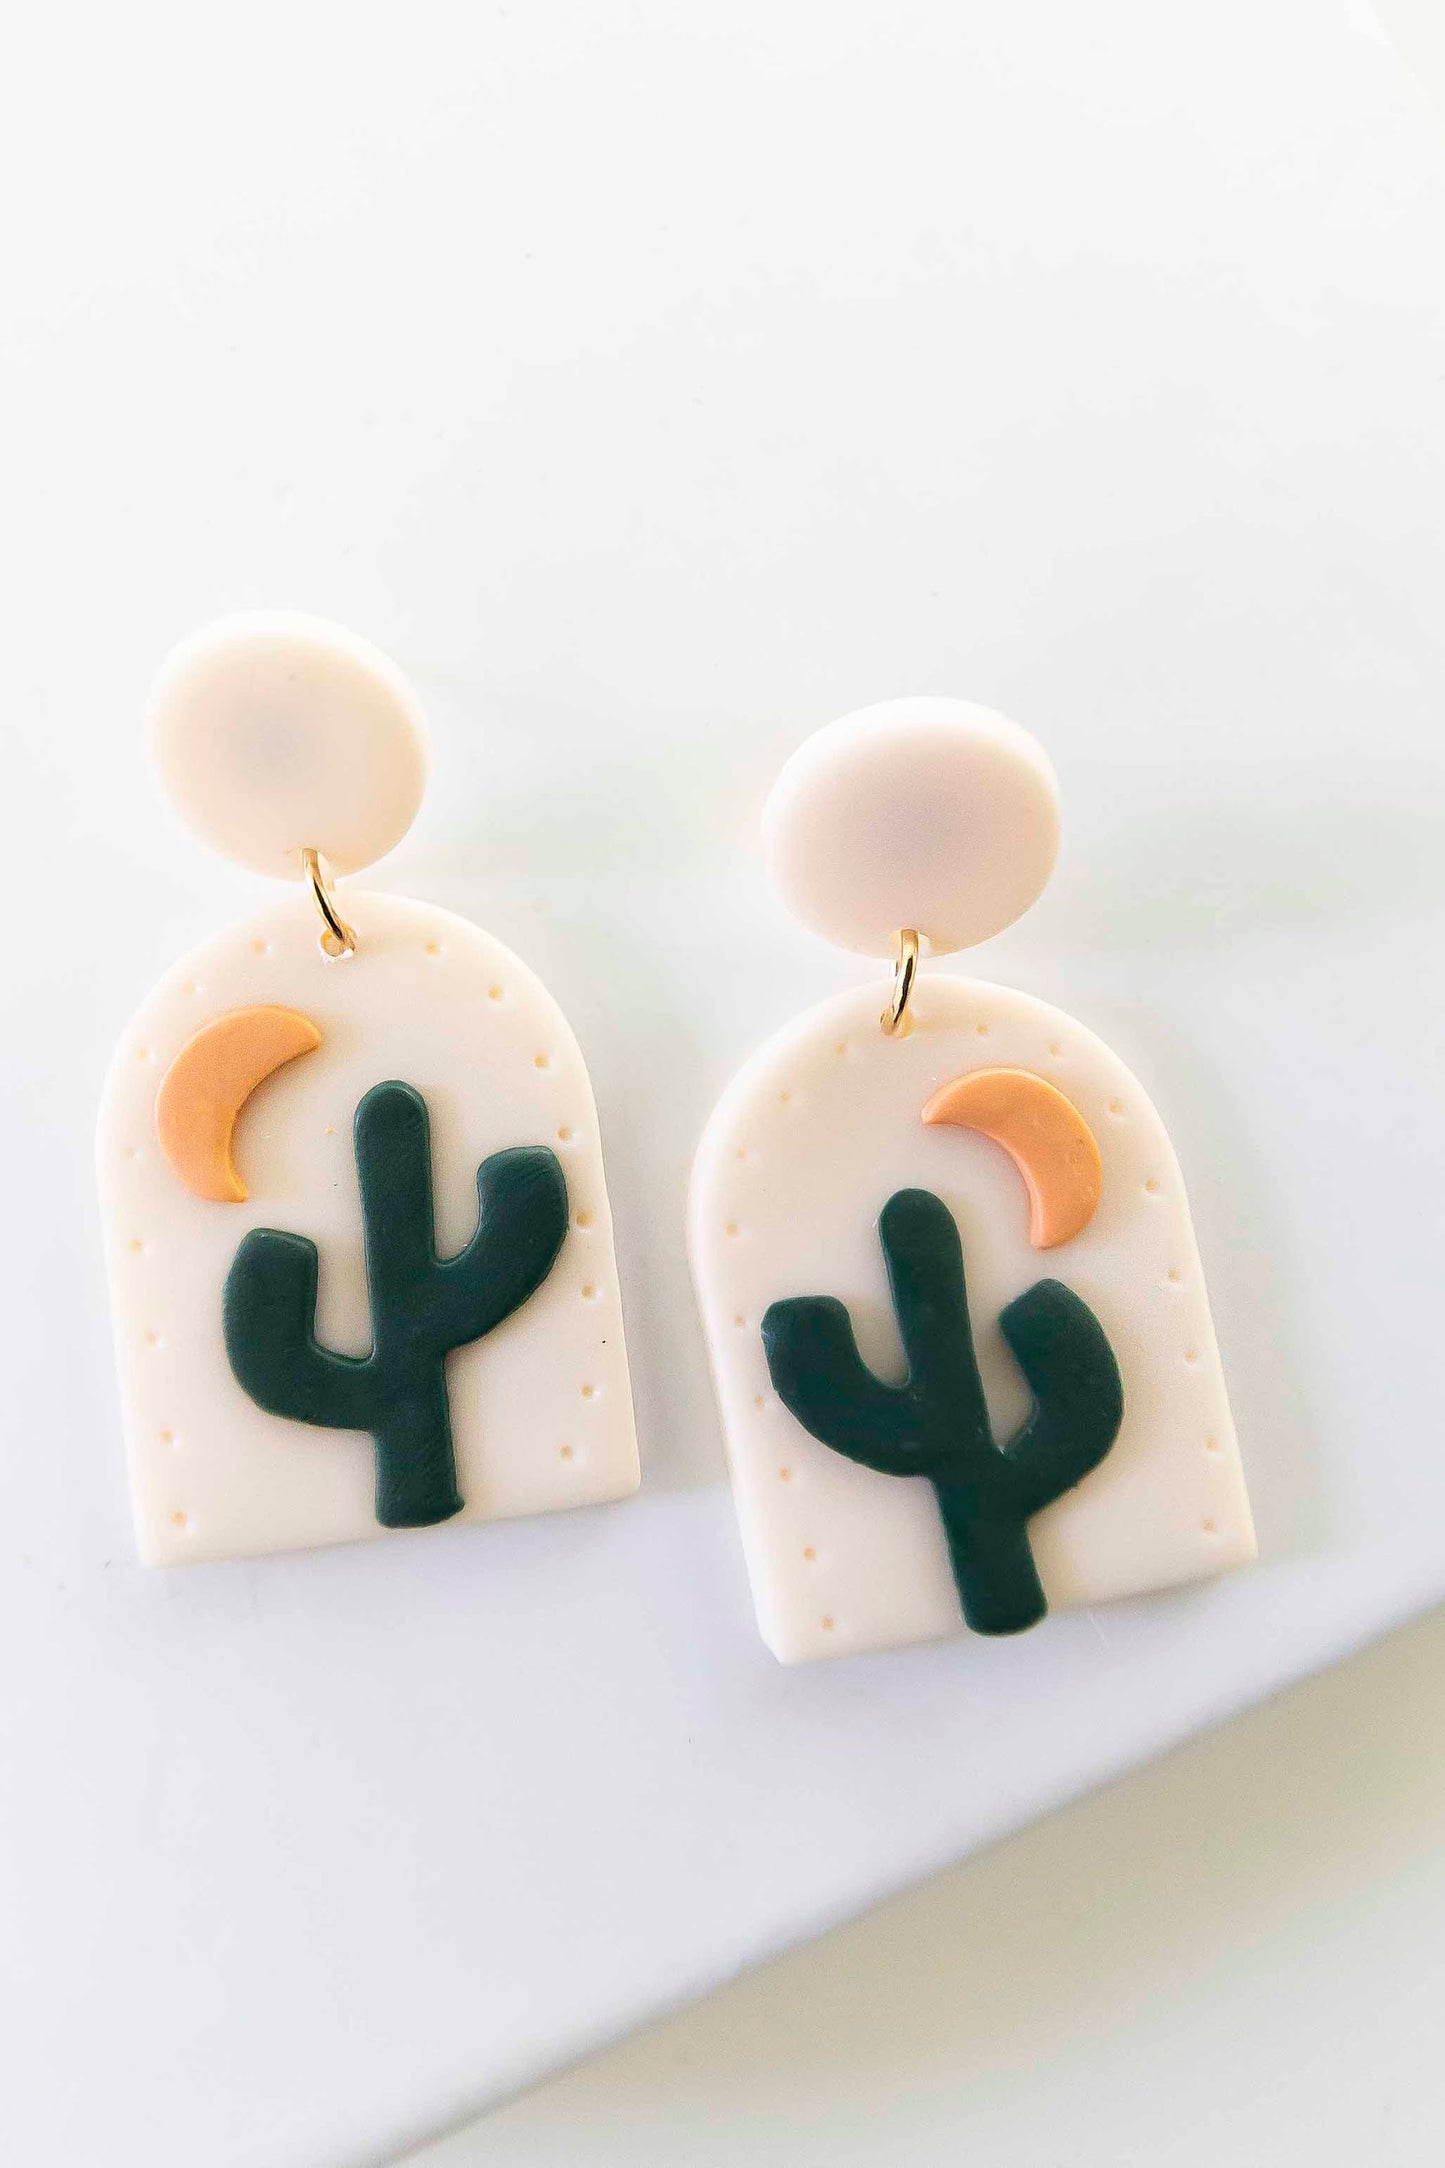 Winslow Clay Cactus Earrings | Sand Beige Clay Backdrop with Green Cactus Detail | Handmade Clay Earrings | Southwestern Desert Style